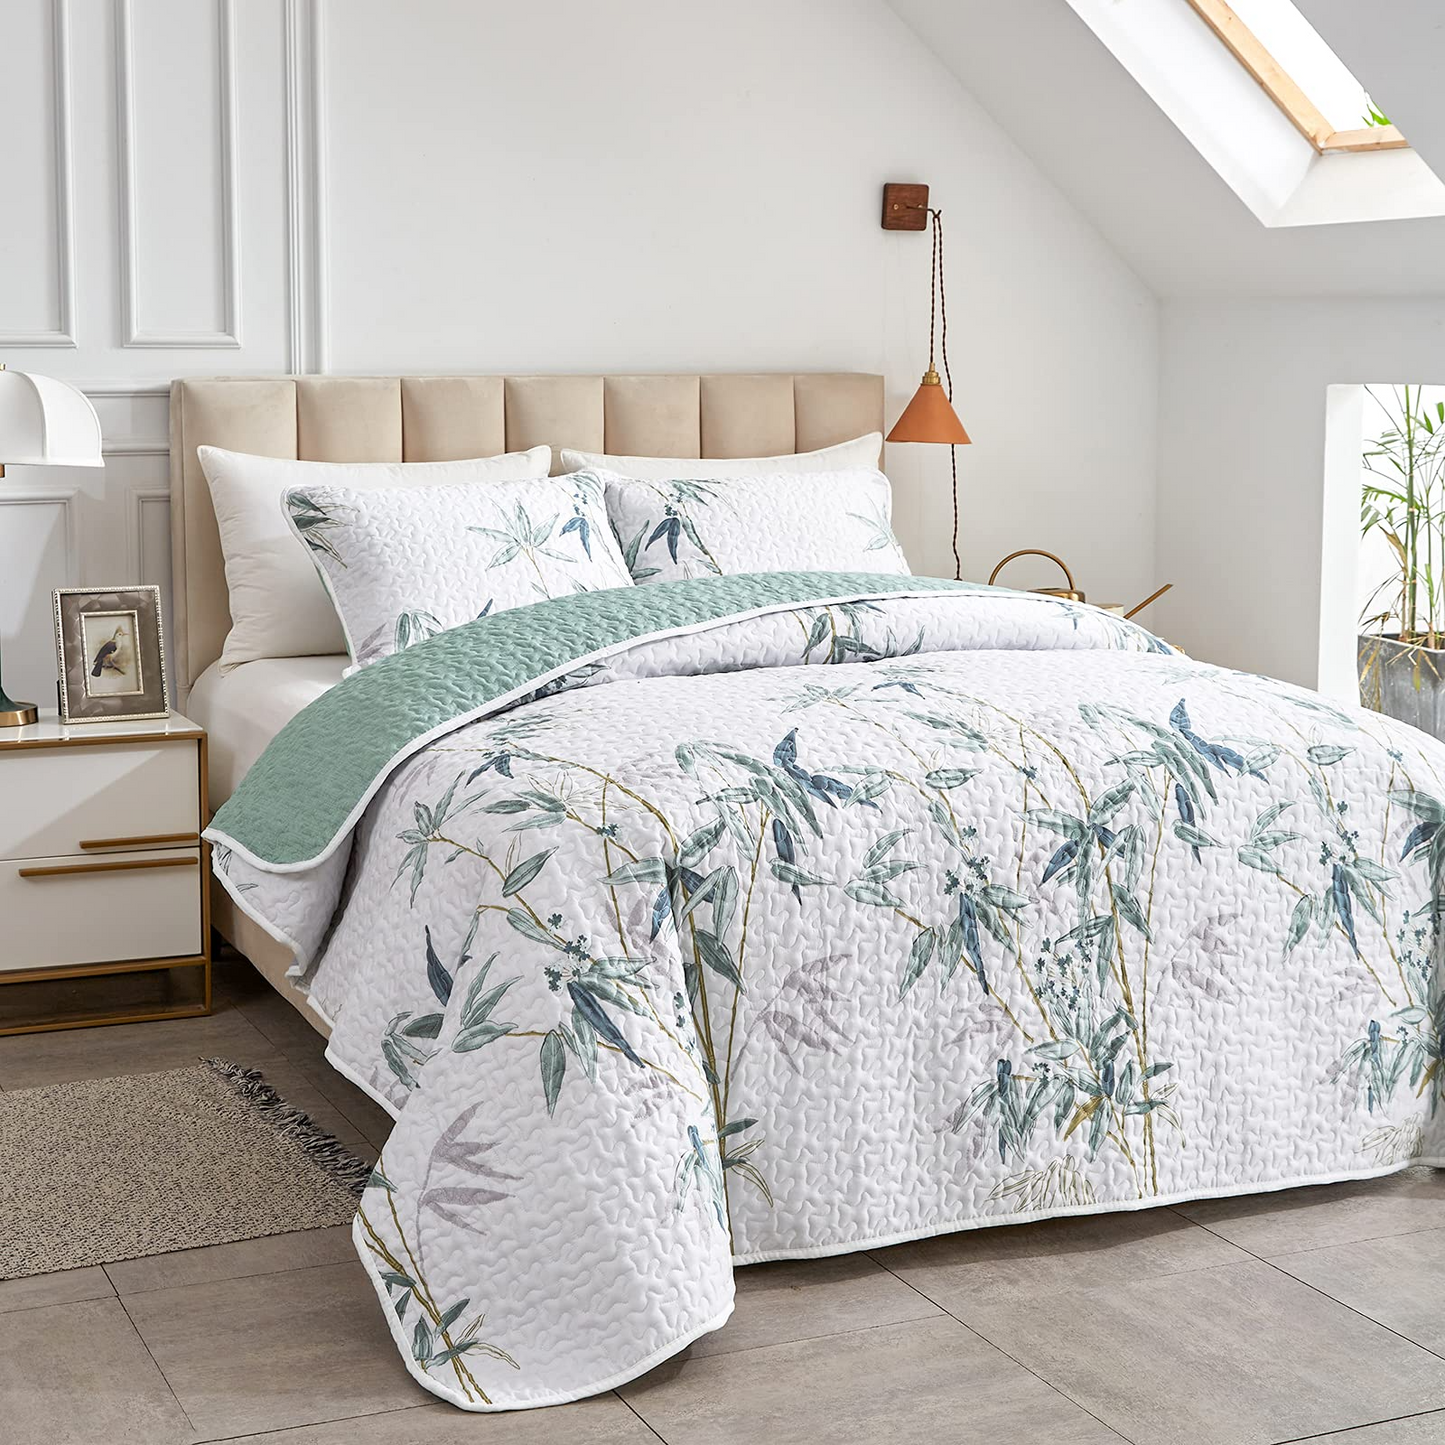 Green Leaves Printed on White Reversible Botanical Bedspread 3 Pieces Quilt Set with 2 Pillowshams